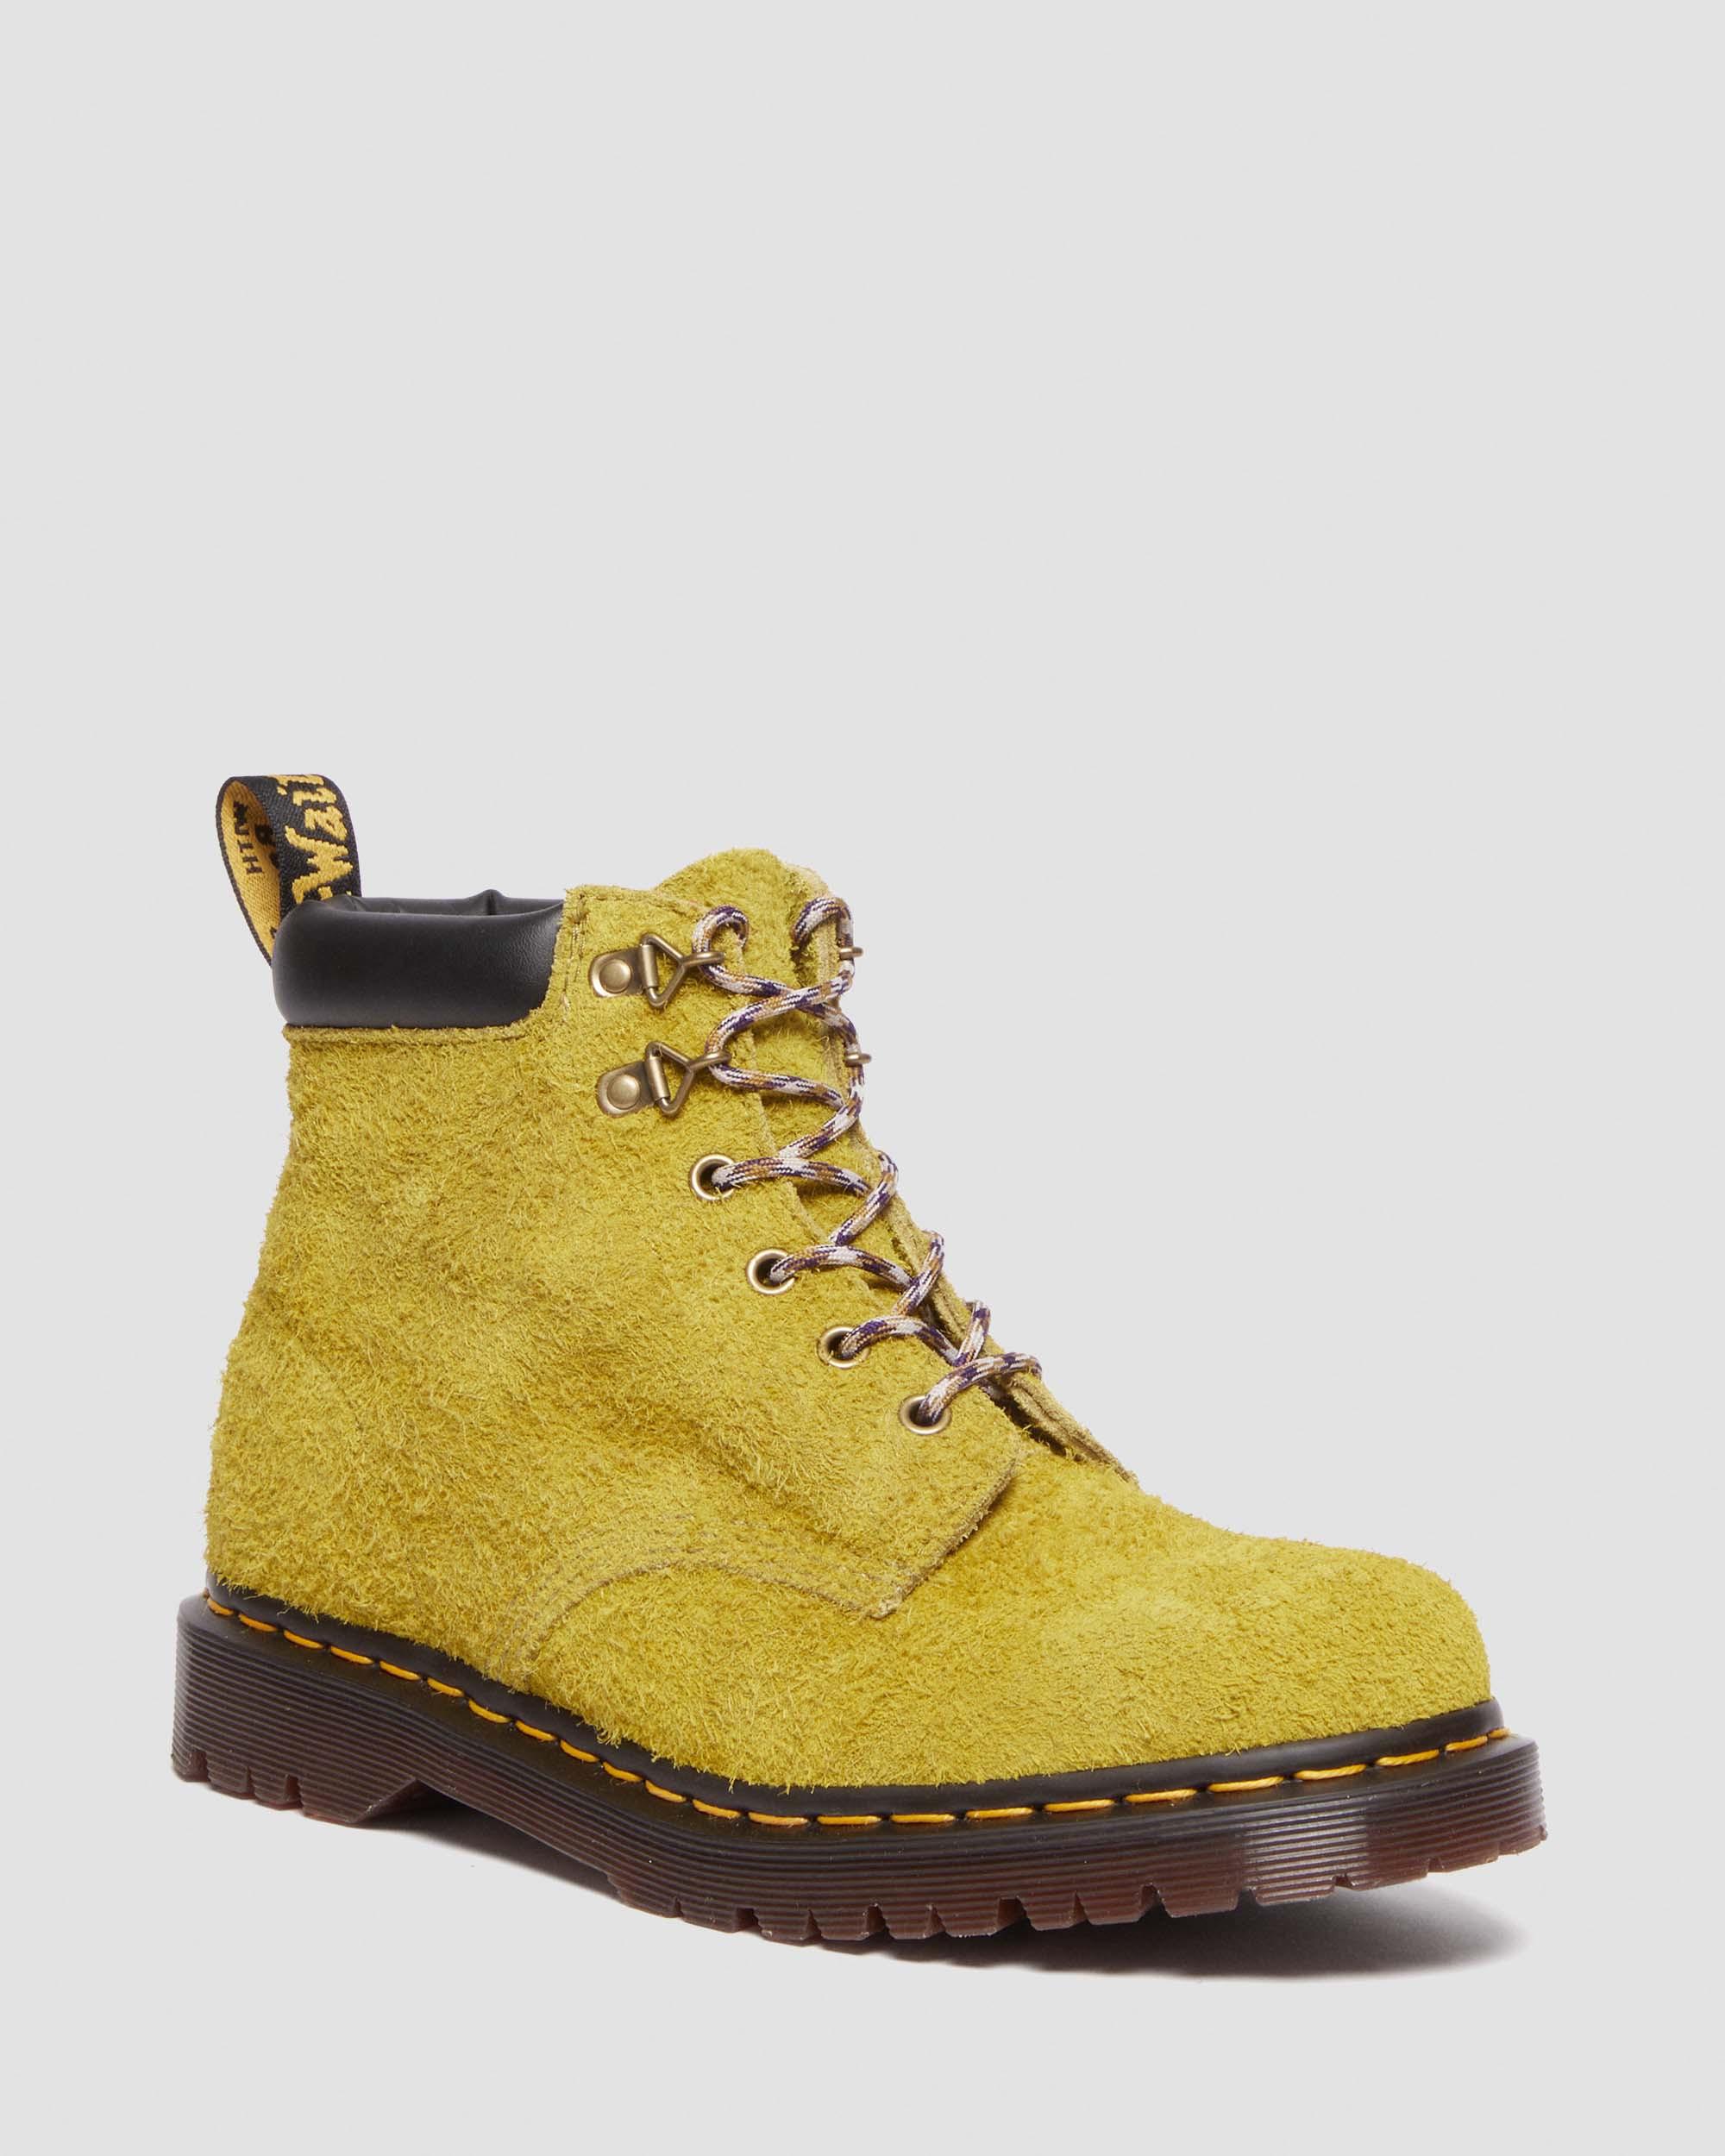 939 Ben Suede Padded Collar Lace Up Boots in Moss Green | Dr. Martens